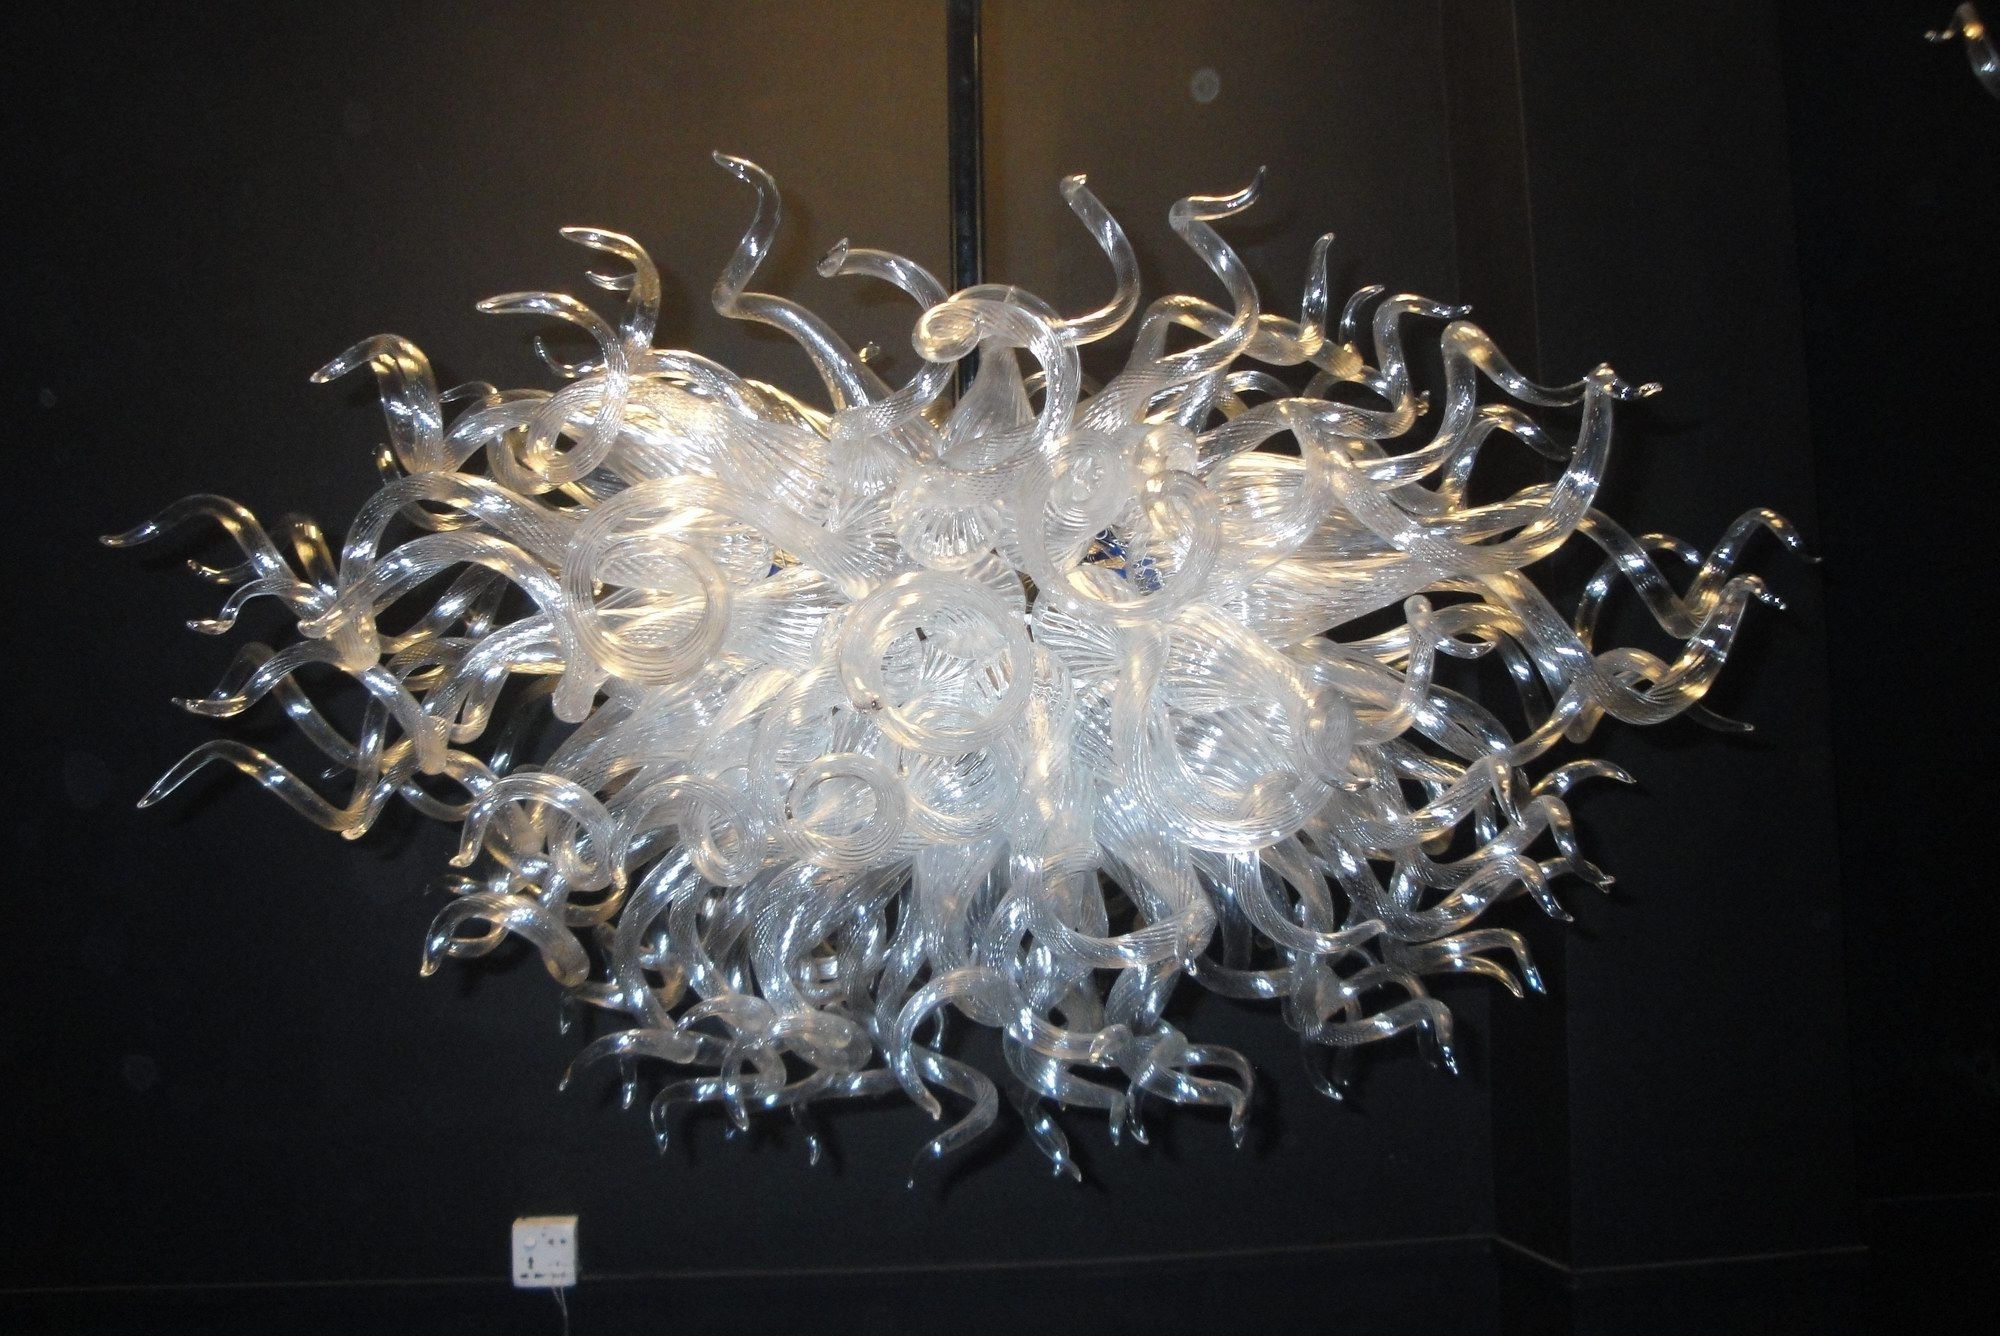 White Blown Glass Chandelier In Popular Glass Chandeliers (View 18 of 20)